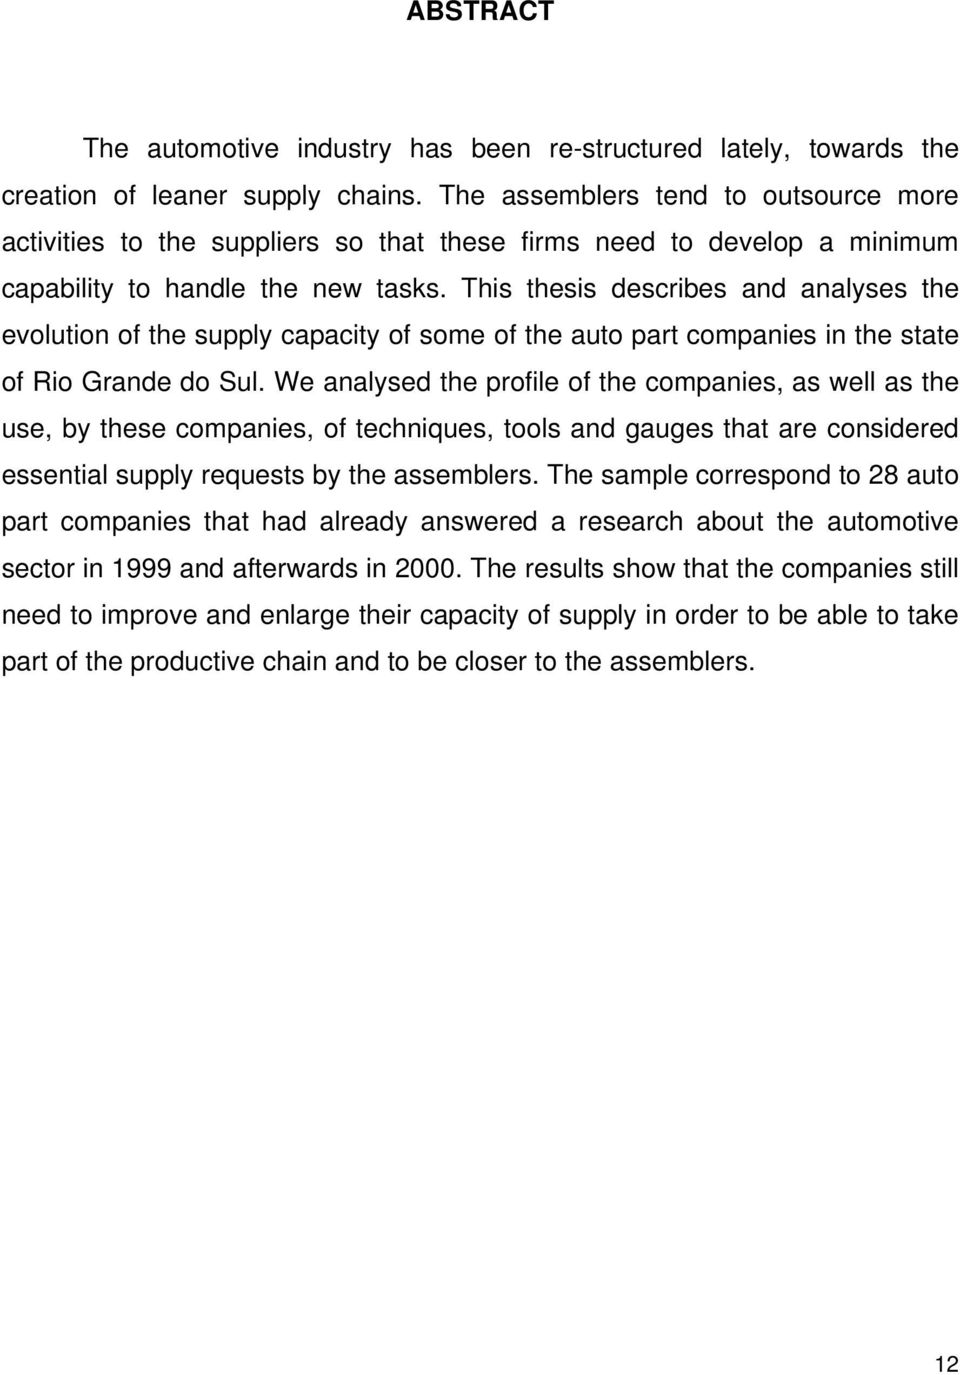 This thesis describes and analyses the evolution of the supply capacity of some of the auto part companies in the state of Rio Grande do Sul.